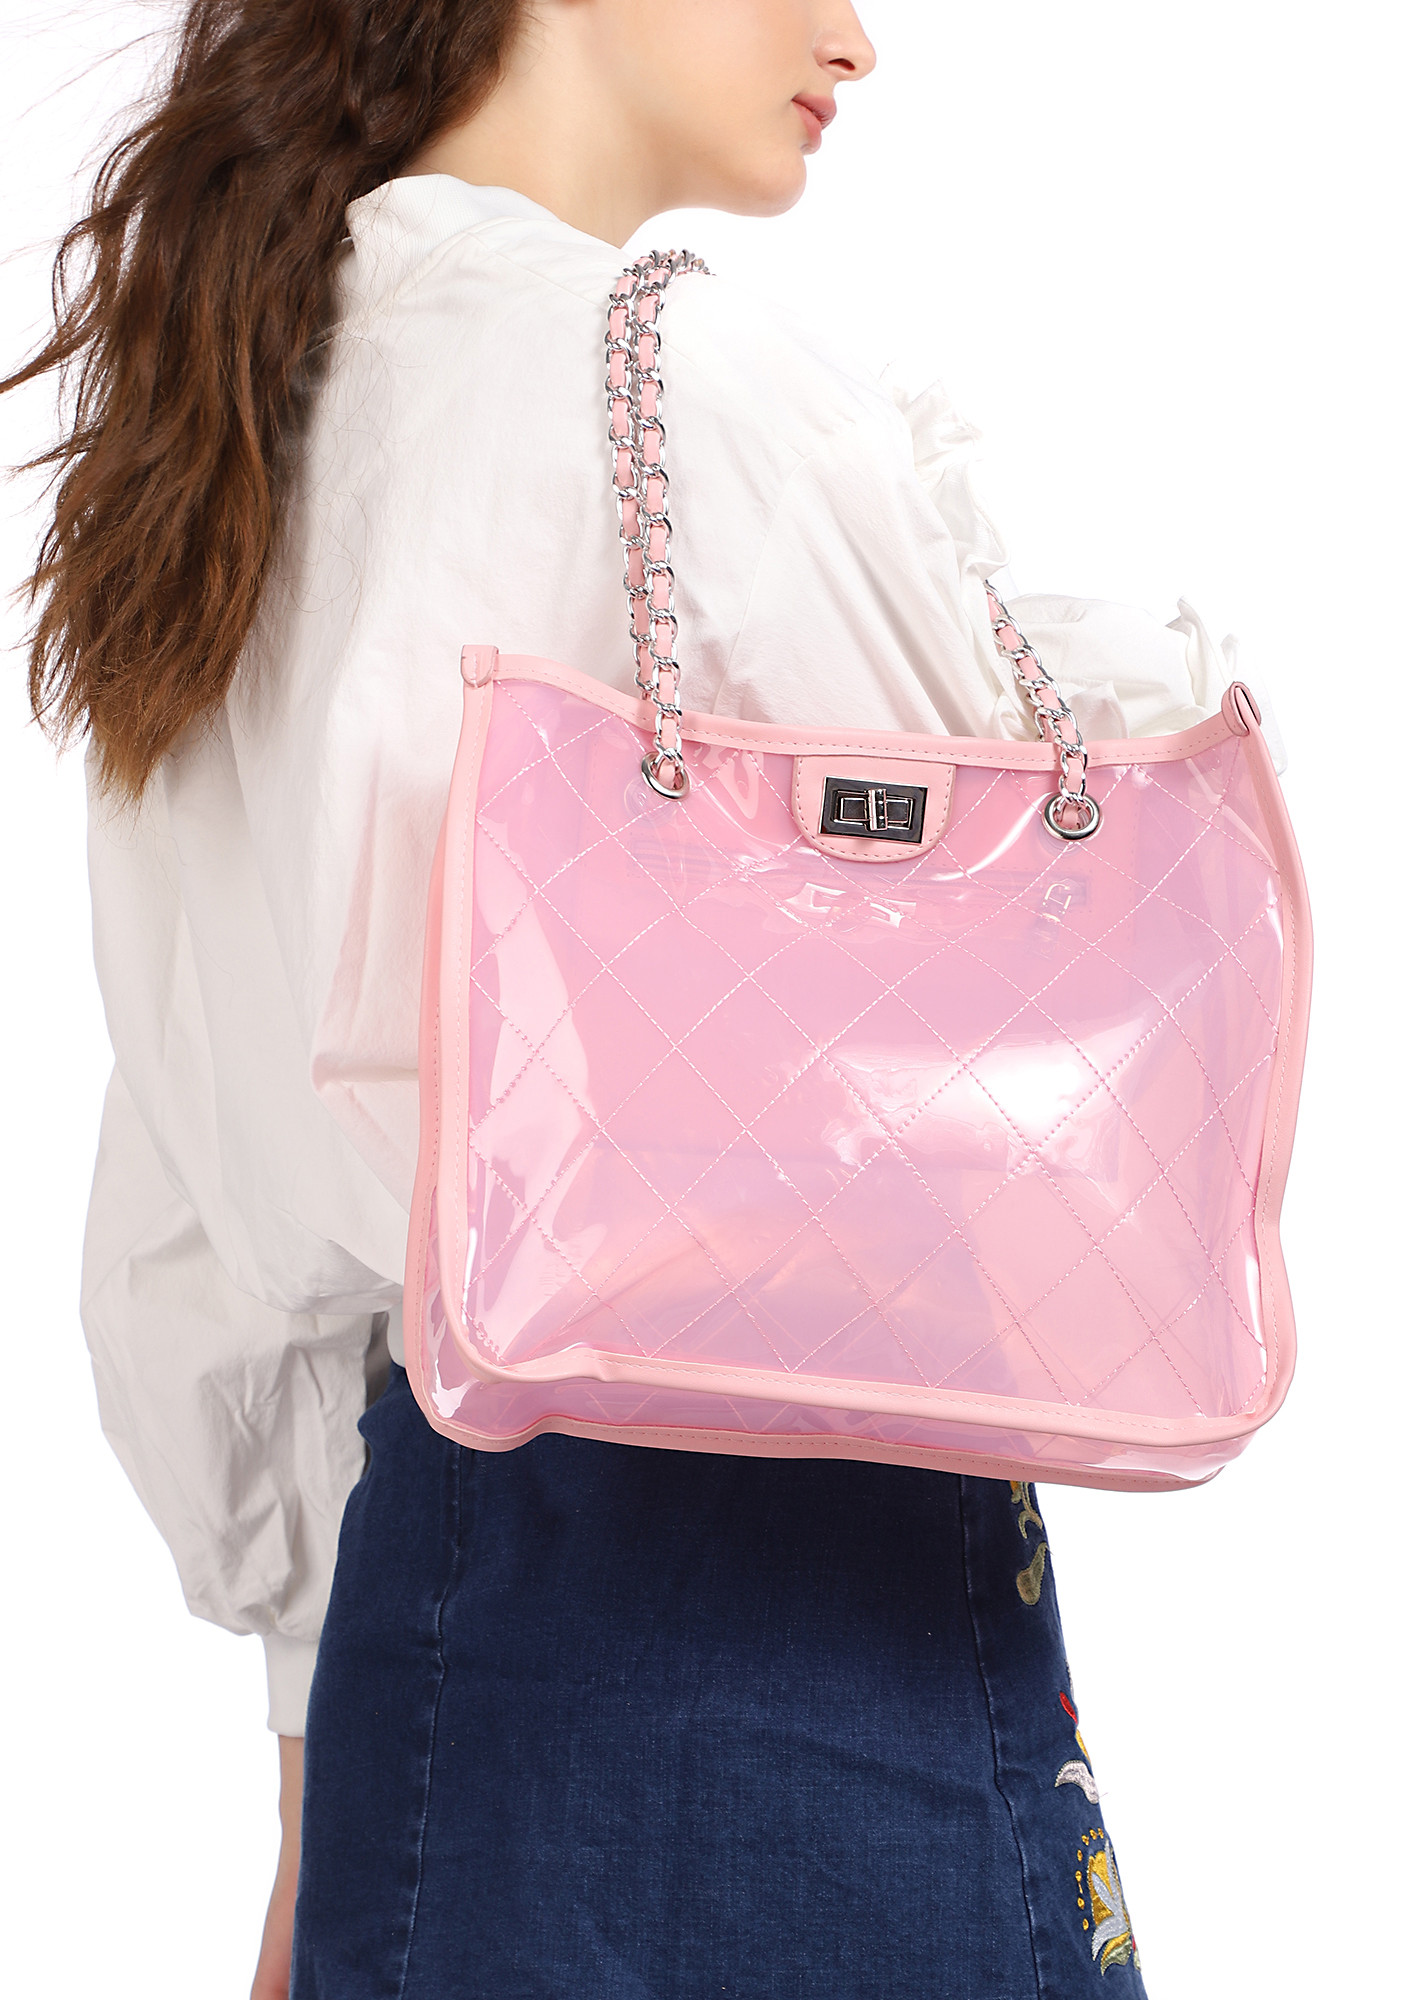 CLEAR YOUR DOUBTS PINK TOTE BAG